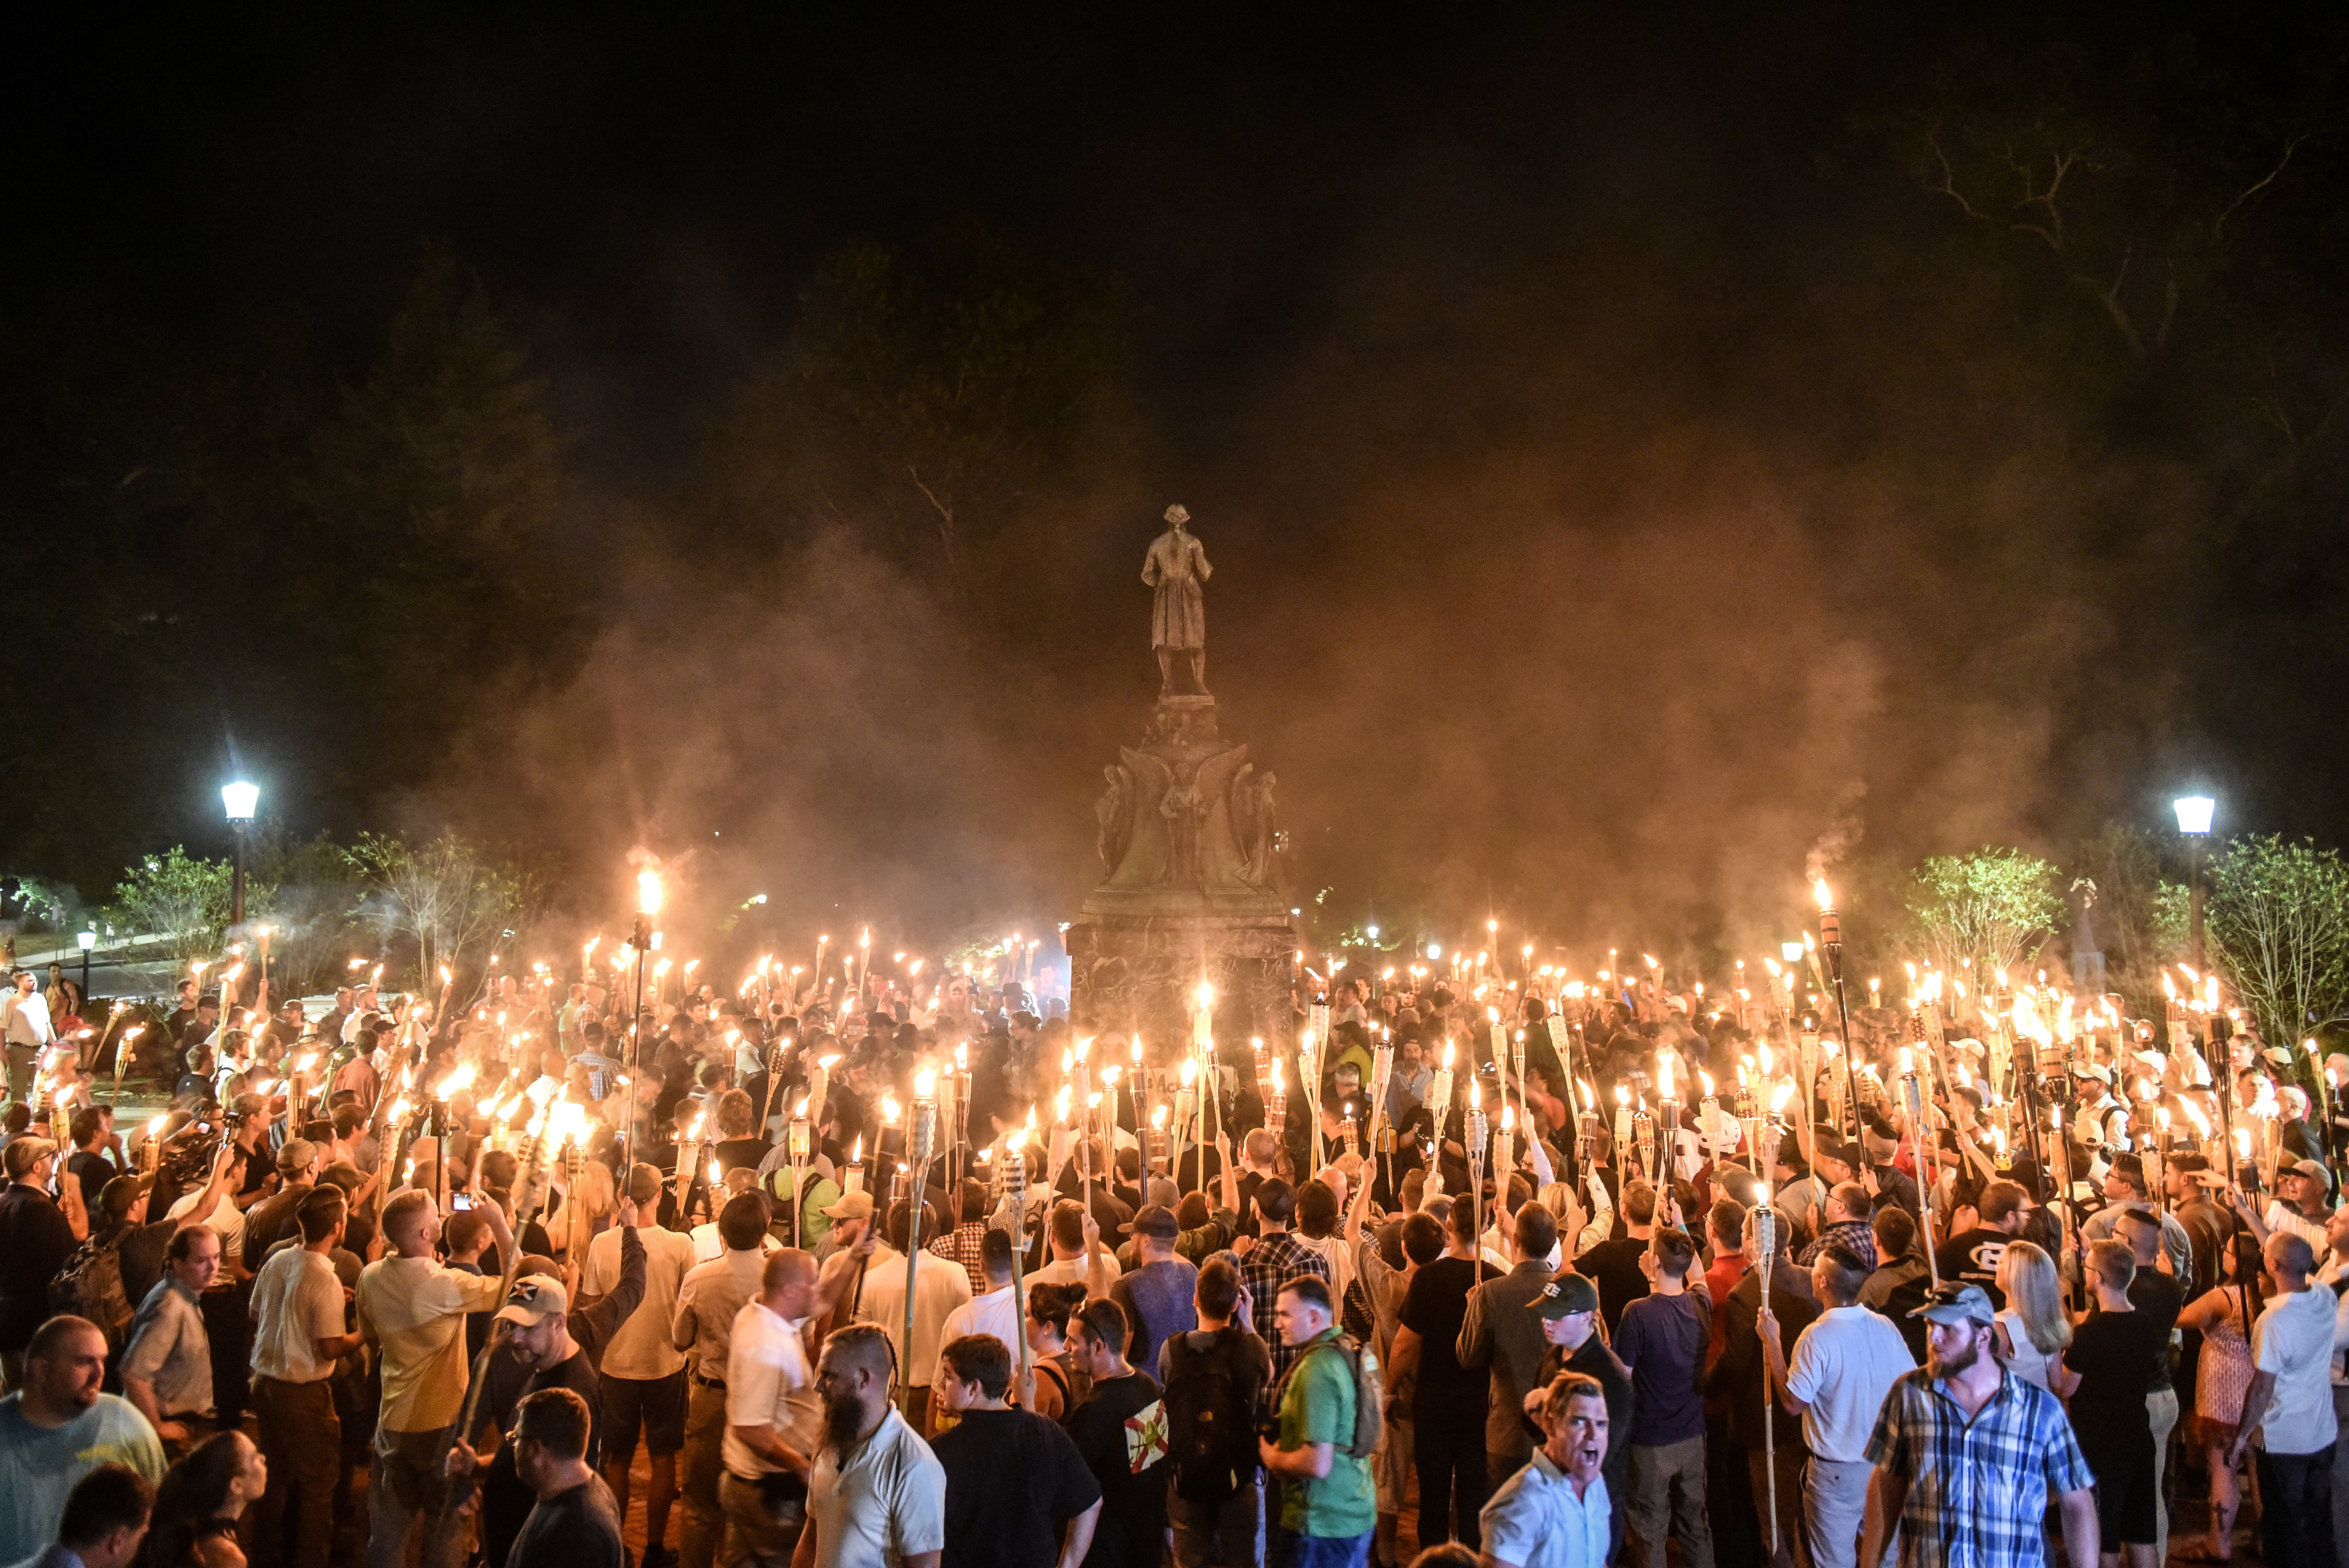 White nationalists participate in a torch-lit march at the University of Virginia. The following day, at the Unite the Right rally on August 12, 2017, James Fields rammed his car into counter-protesters, killing 32-year-old Heather Heyer and injuring several others. REUTERS/Stephanie Keith